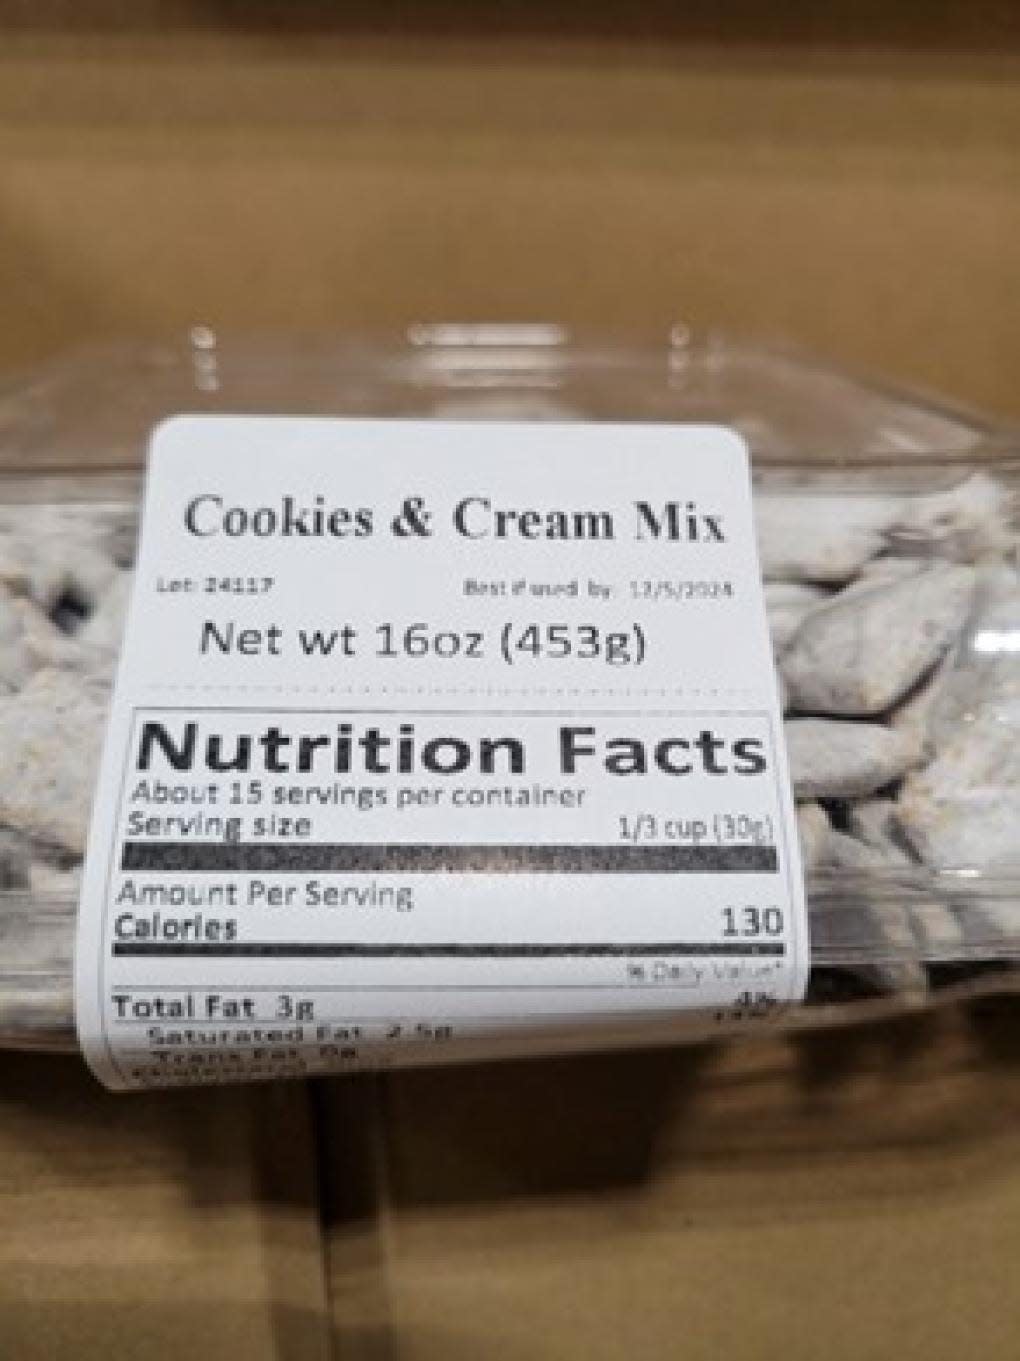 Hy-Vee recalled its cookies and cream snack mix for potentially containing salmonella.